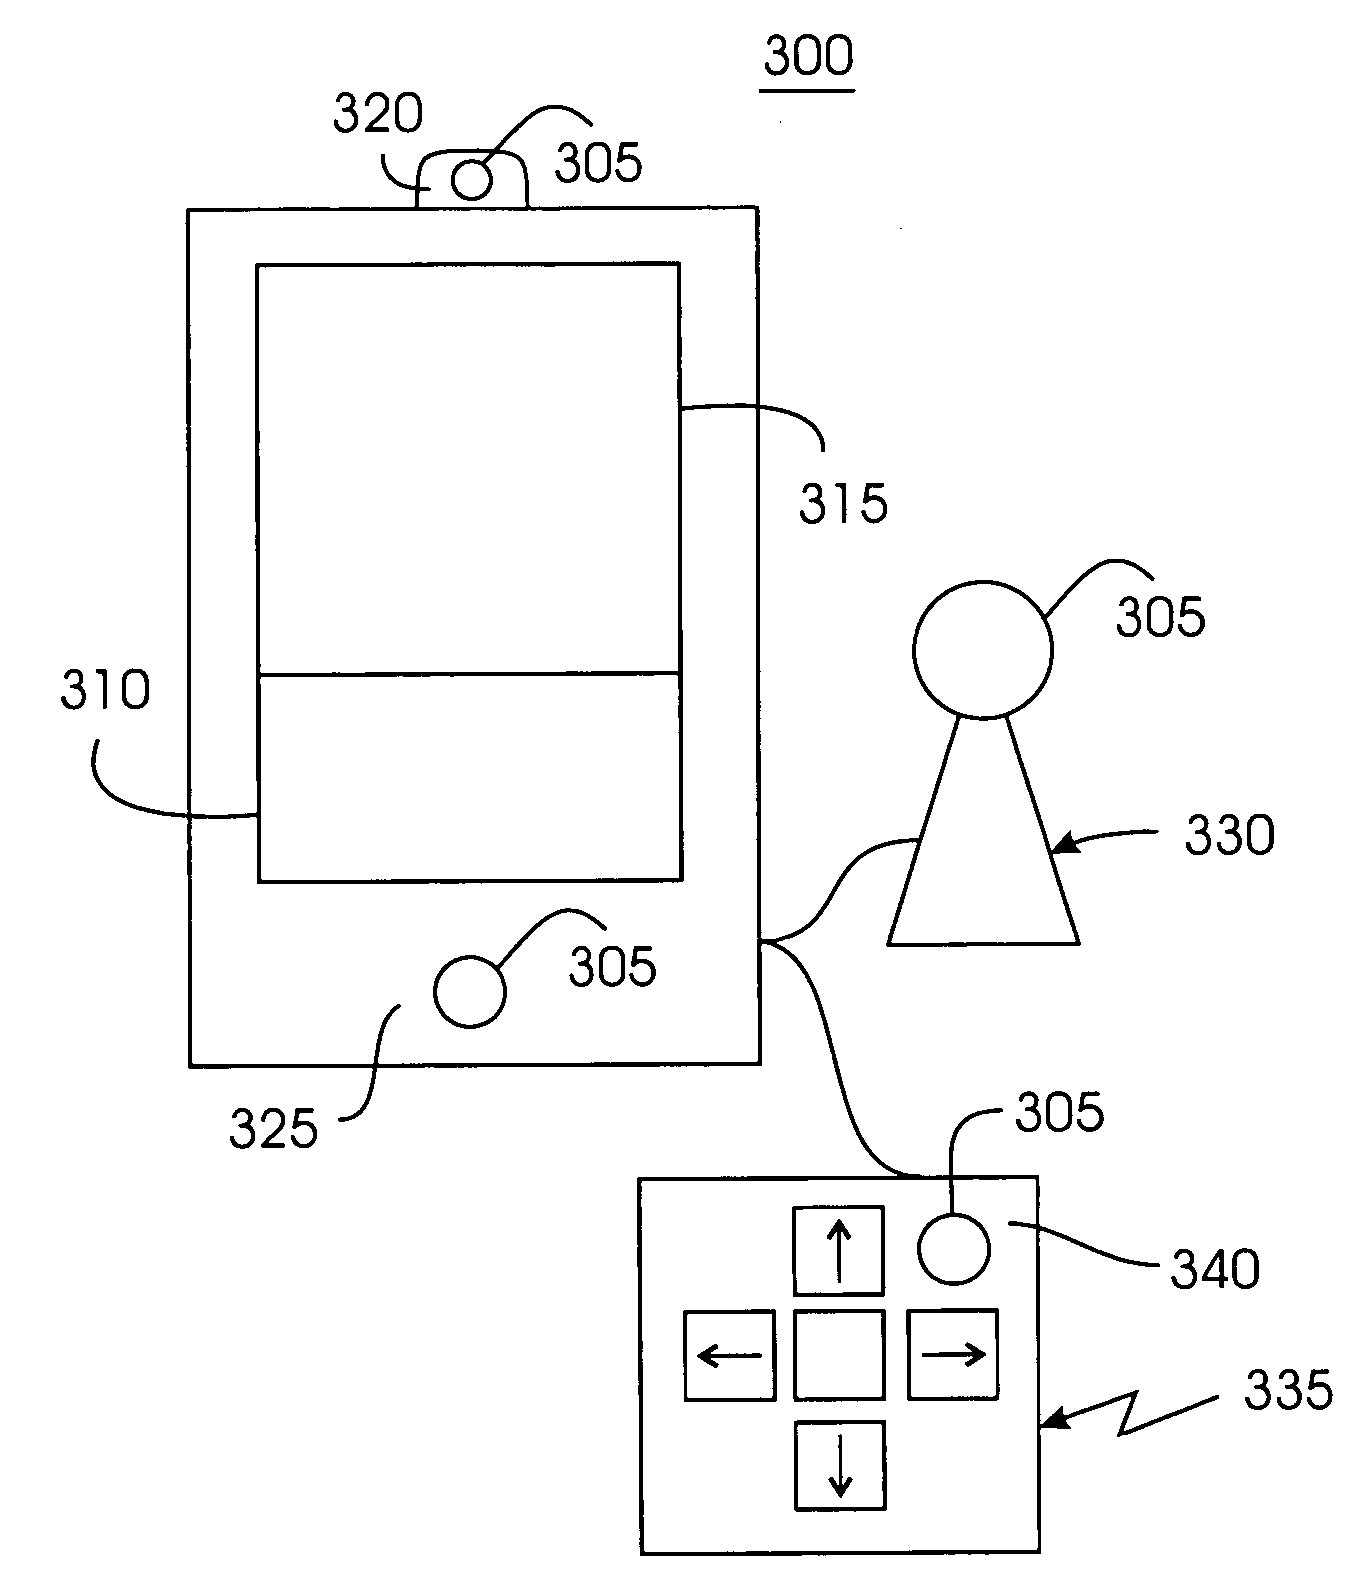 System and method for selecting and activating a target object using a combination of eye gaze and key presses